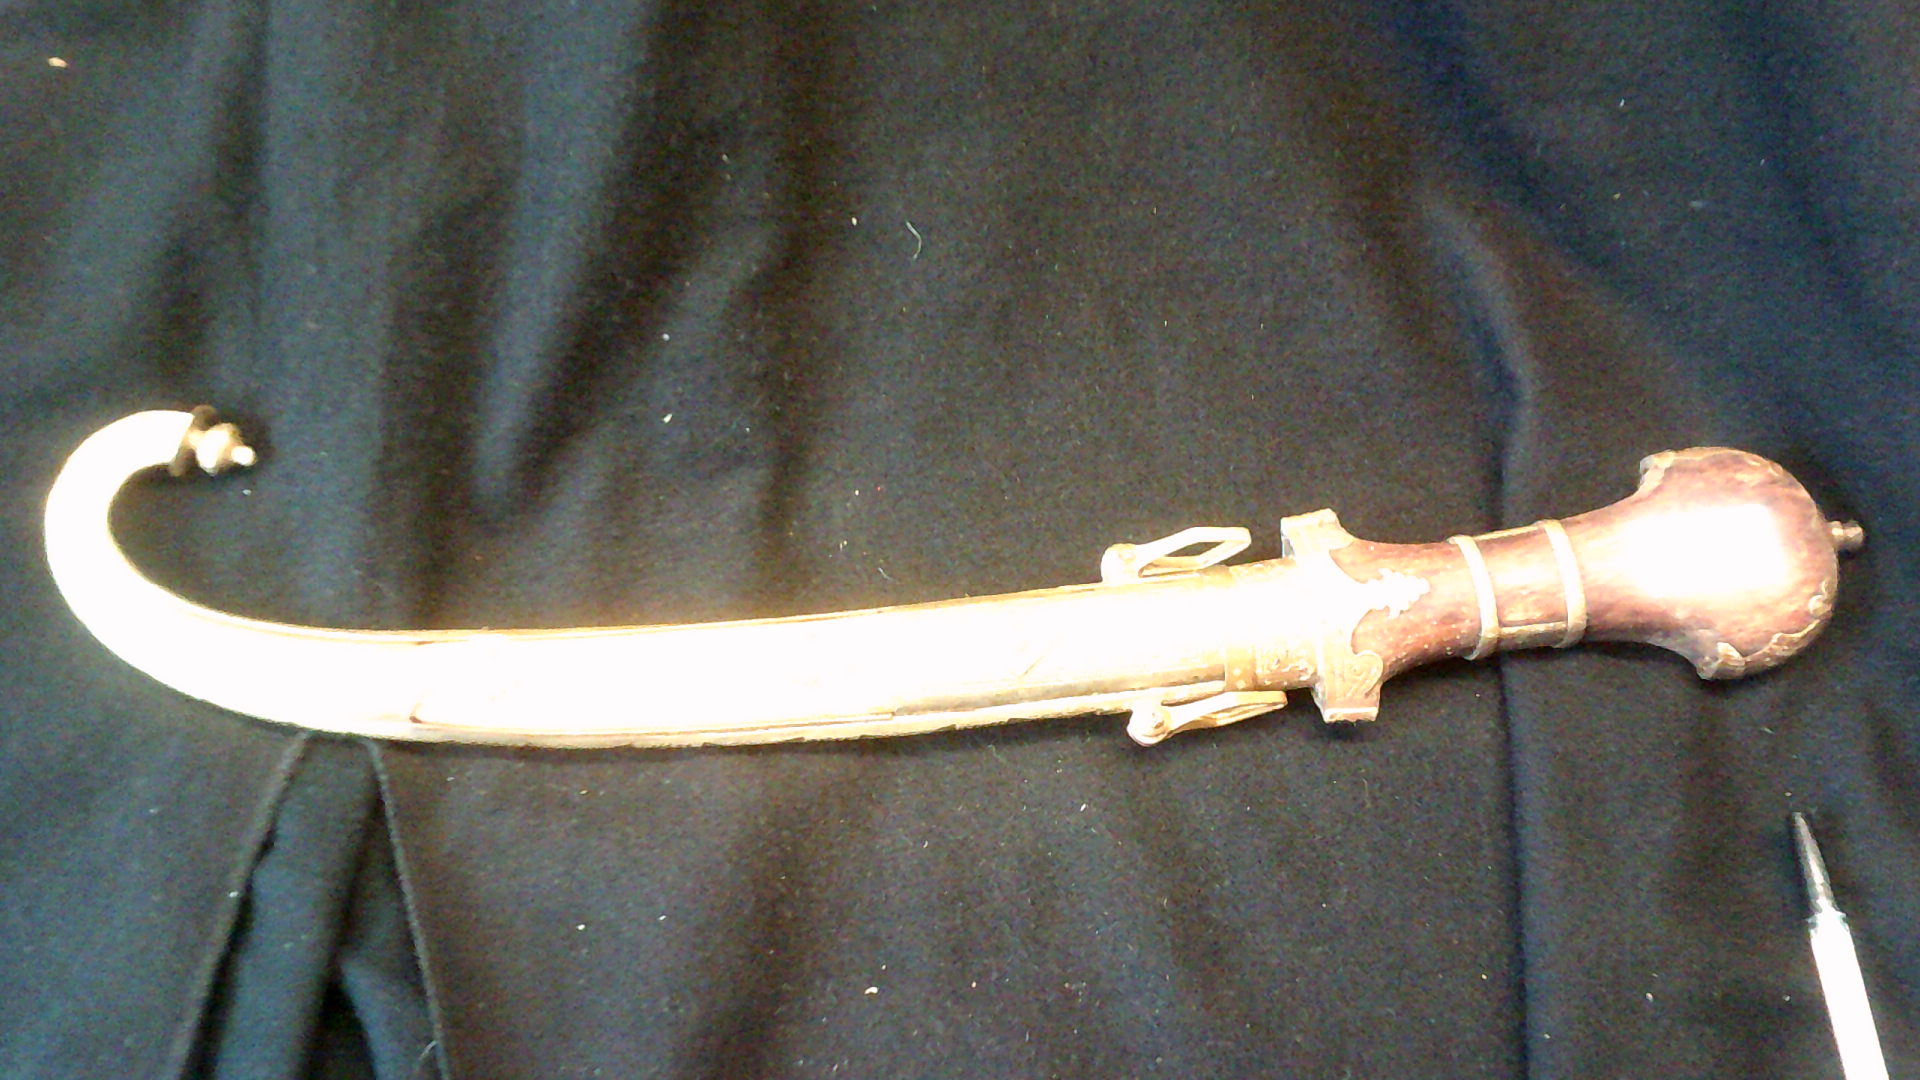 Dagger-Ceremonial Brass, wood and bone dagger, approx. 20 inches in total steel blade. - Image 2 of 2